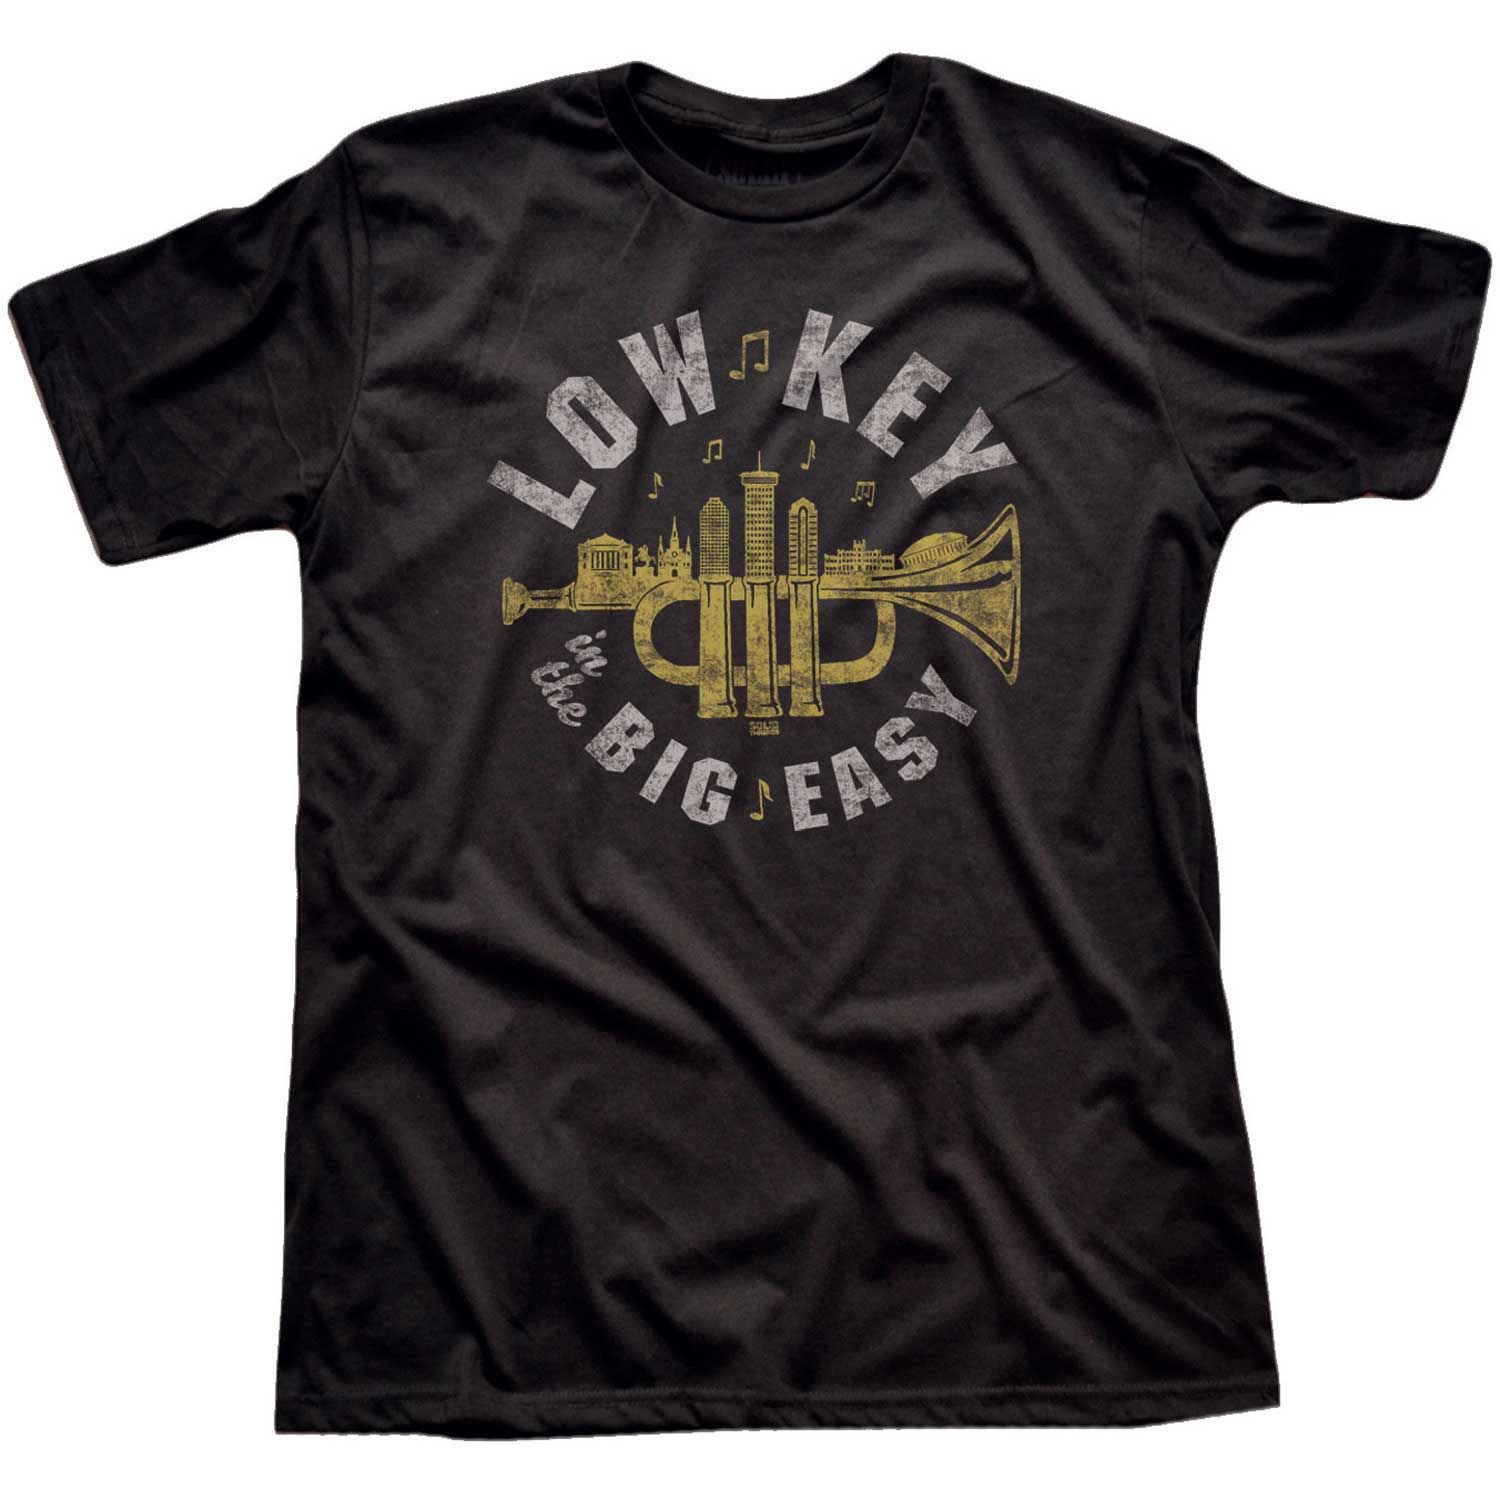 New Orleans The Big Easy T-Shirt